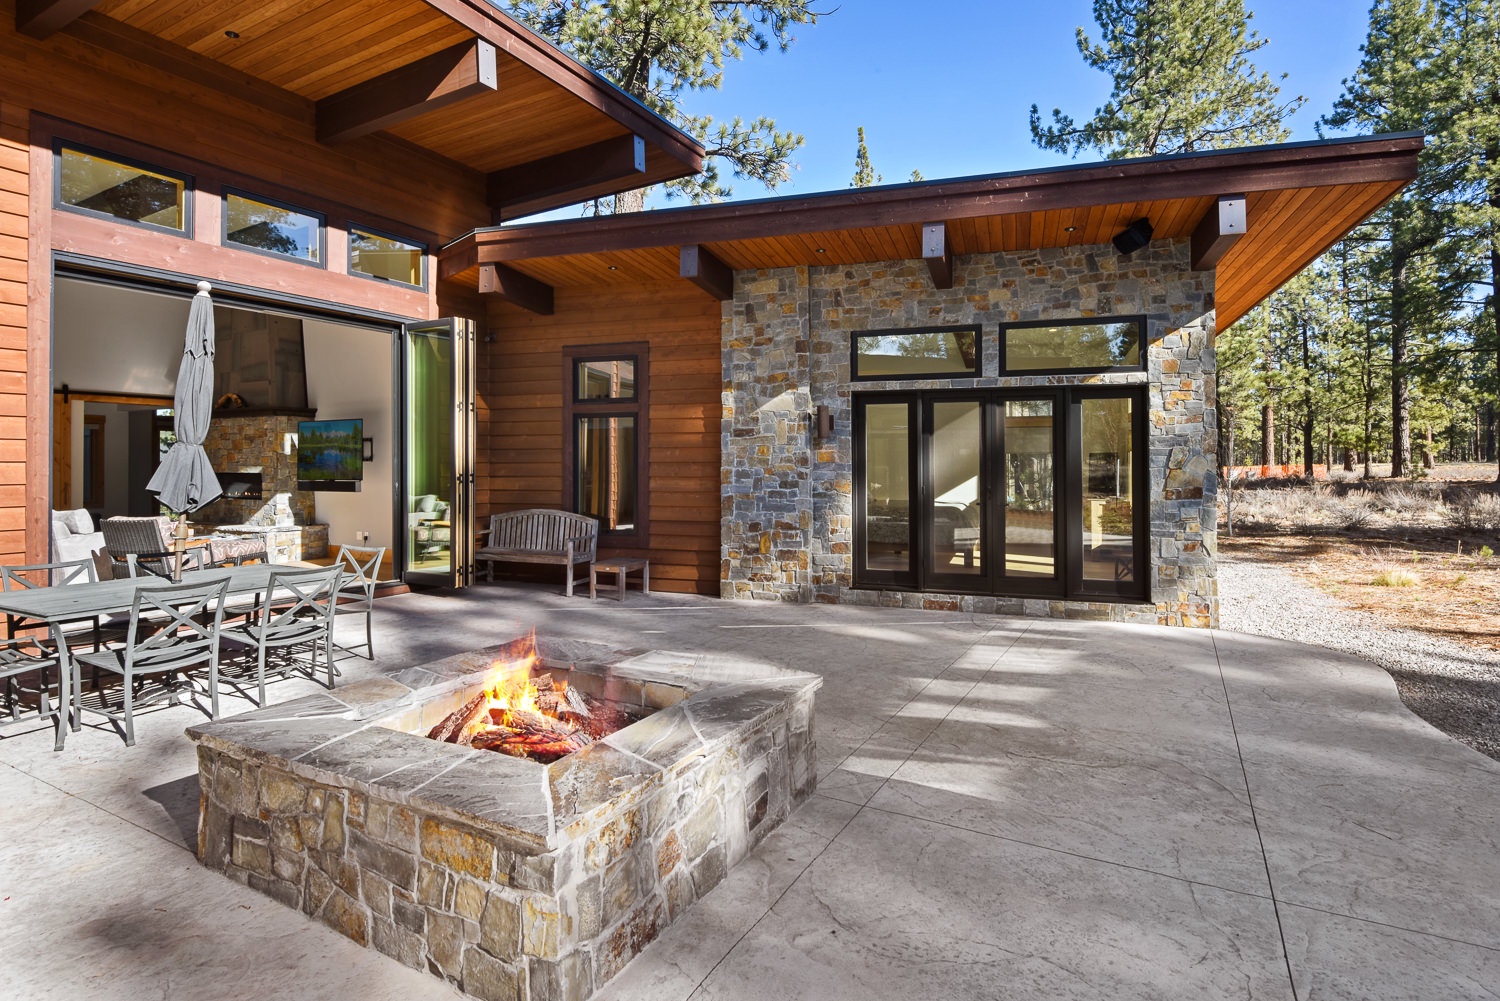 Large patio with gas fireplace, seating, and BBQ